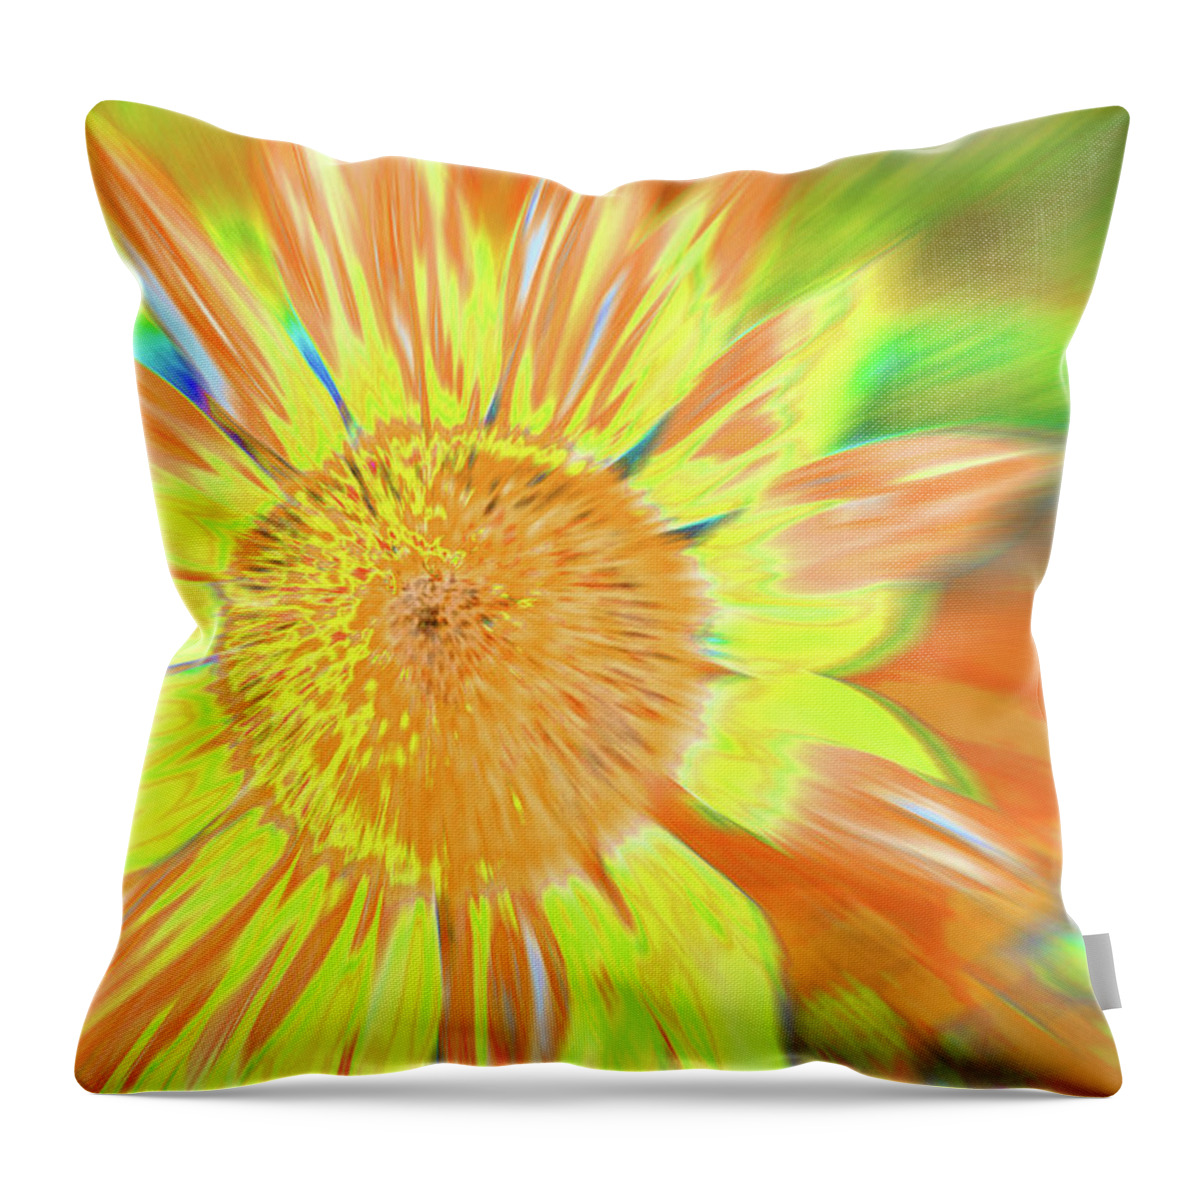 Sunflowers Throw Pillow featuring the photograph Sunsoaring by Cris Fulton